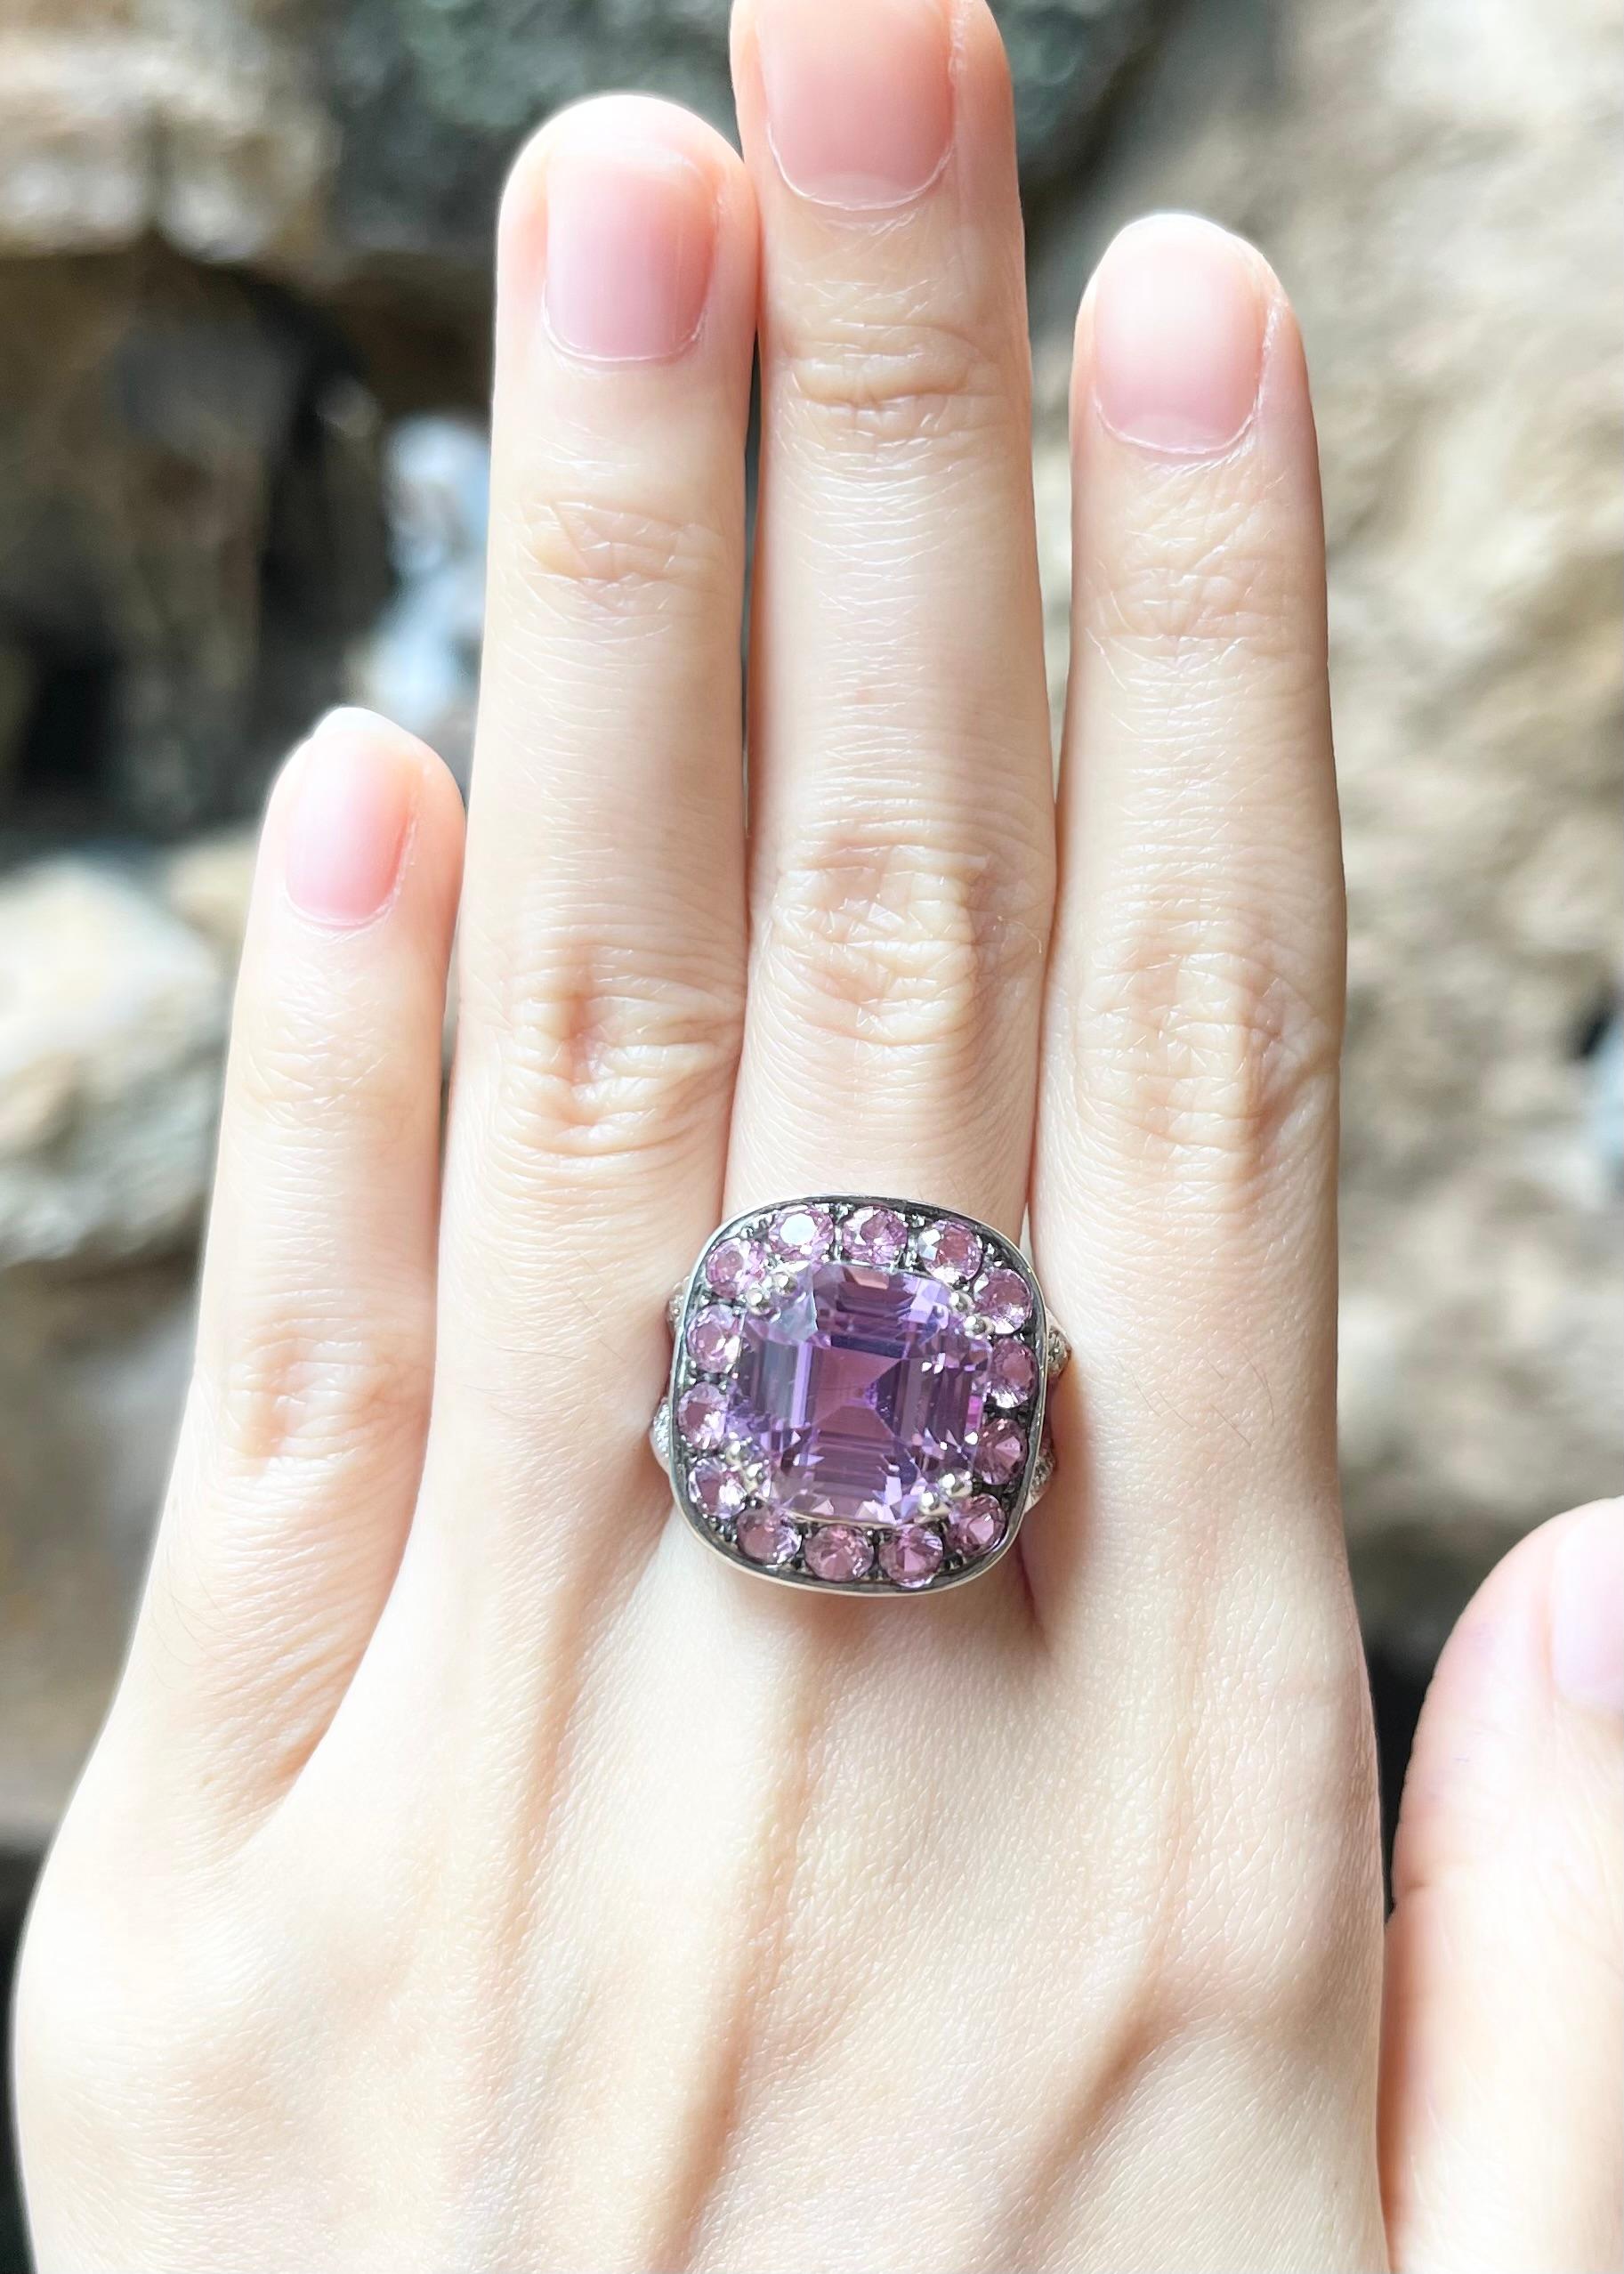 Kunzite 11.48 carats, Pink Sapphire 3.90 carats and Diamond 1.05 carats Ring set in 18K White Gold Settings 

Width:  1.8 cm 
Length: 1.2 cm
Ring Size: 57
Total Weight: 18.6 grams

Kunzite
Width:  1.3 cm 
Length: 1.3 cm

